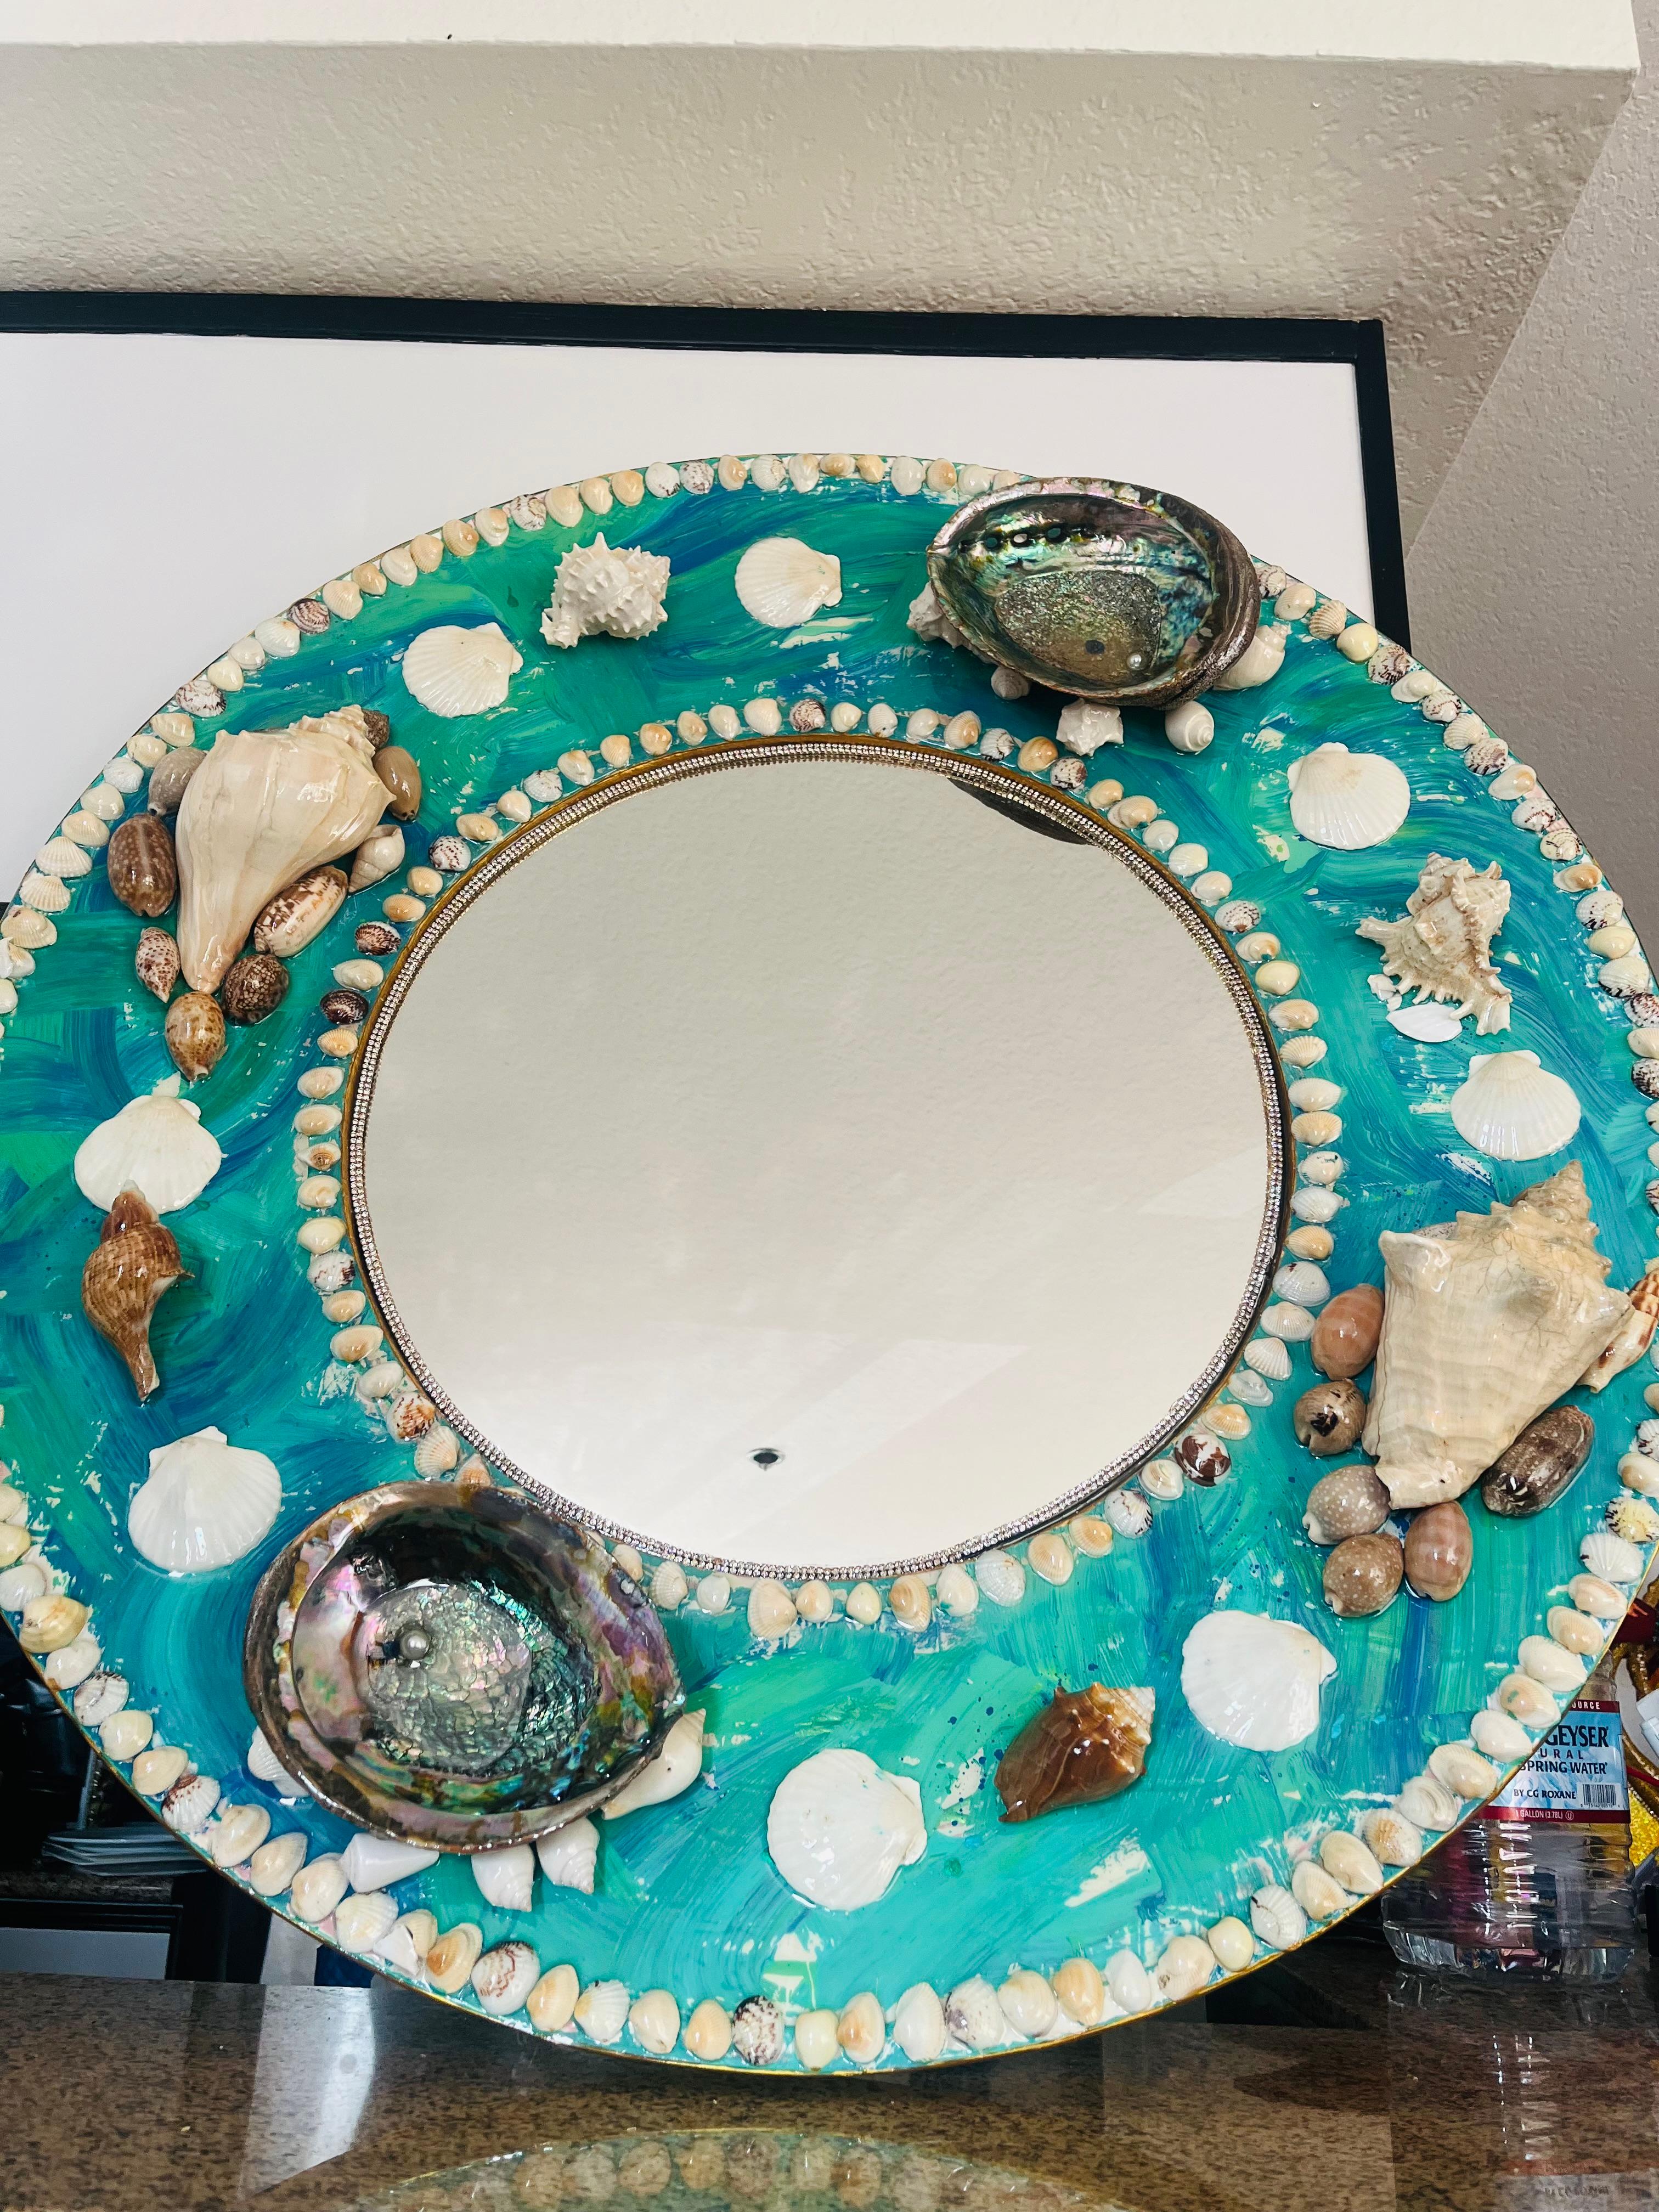 CARIBBEAN MIRROR (One Of A kind Seashells Encrusted Round Mirror W/ Wood Frame) - Sculpture by Mauro Oliveira